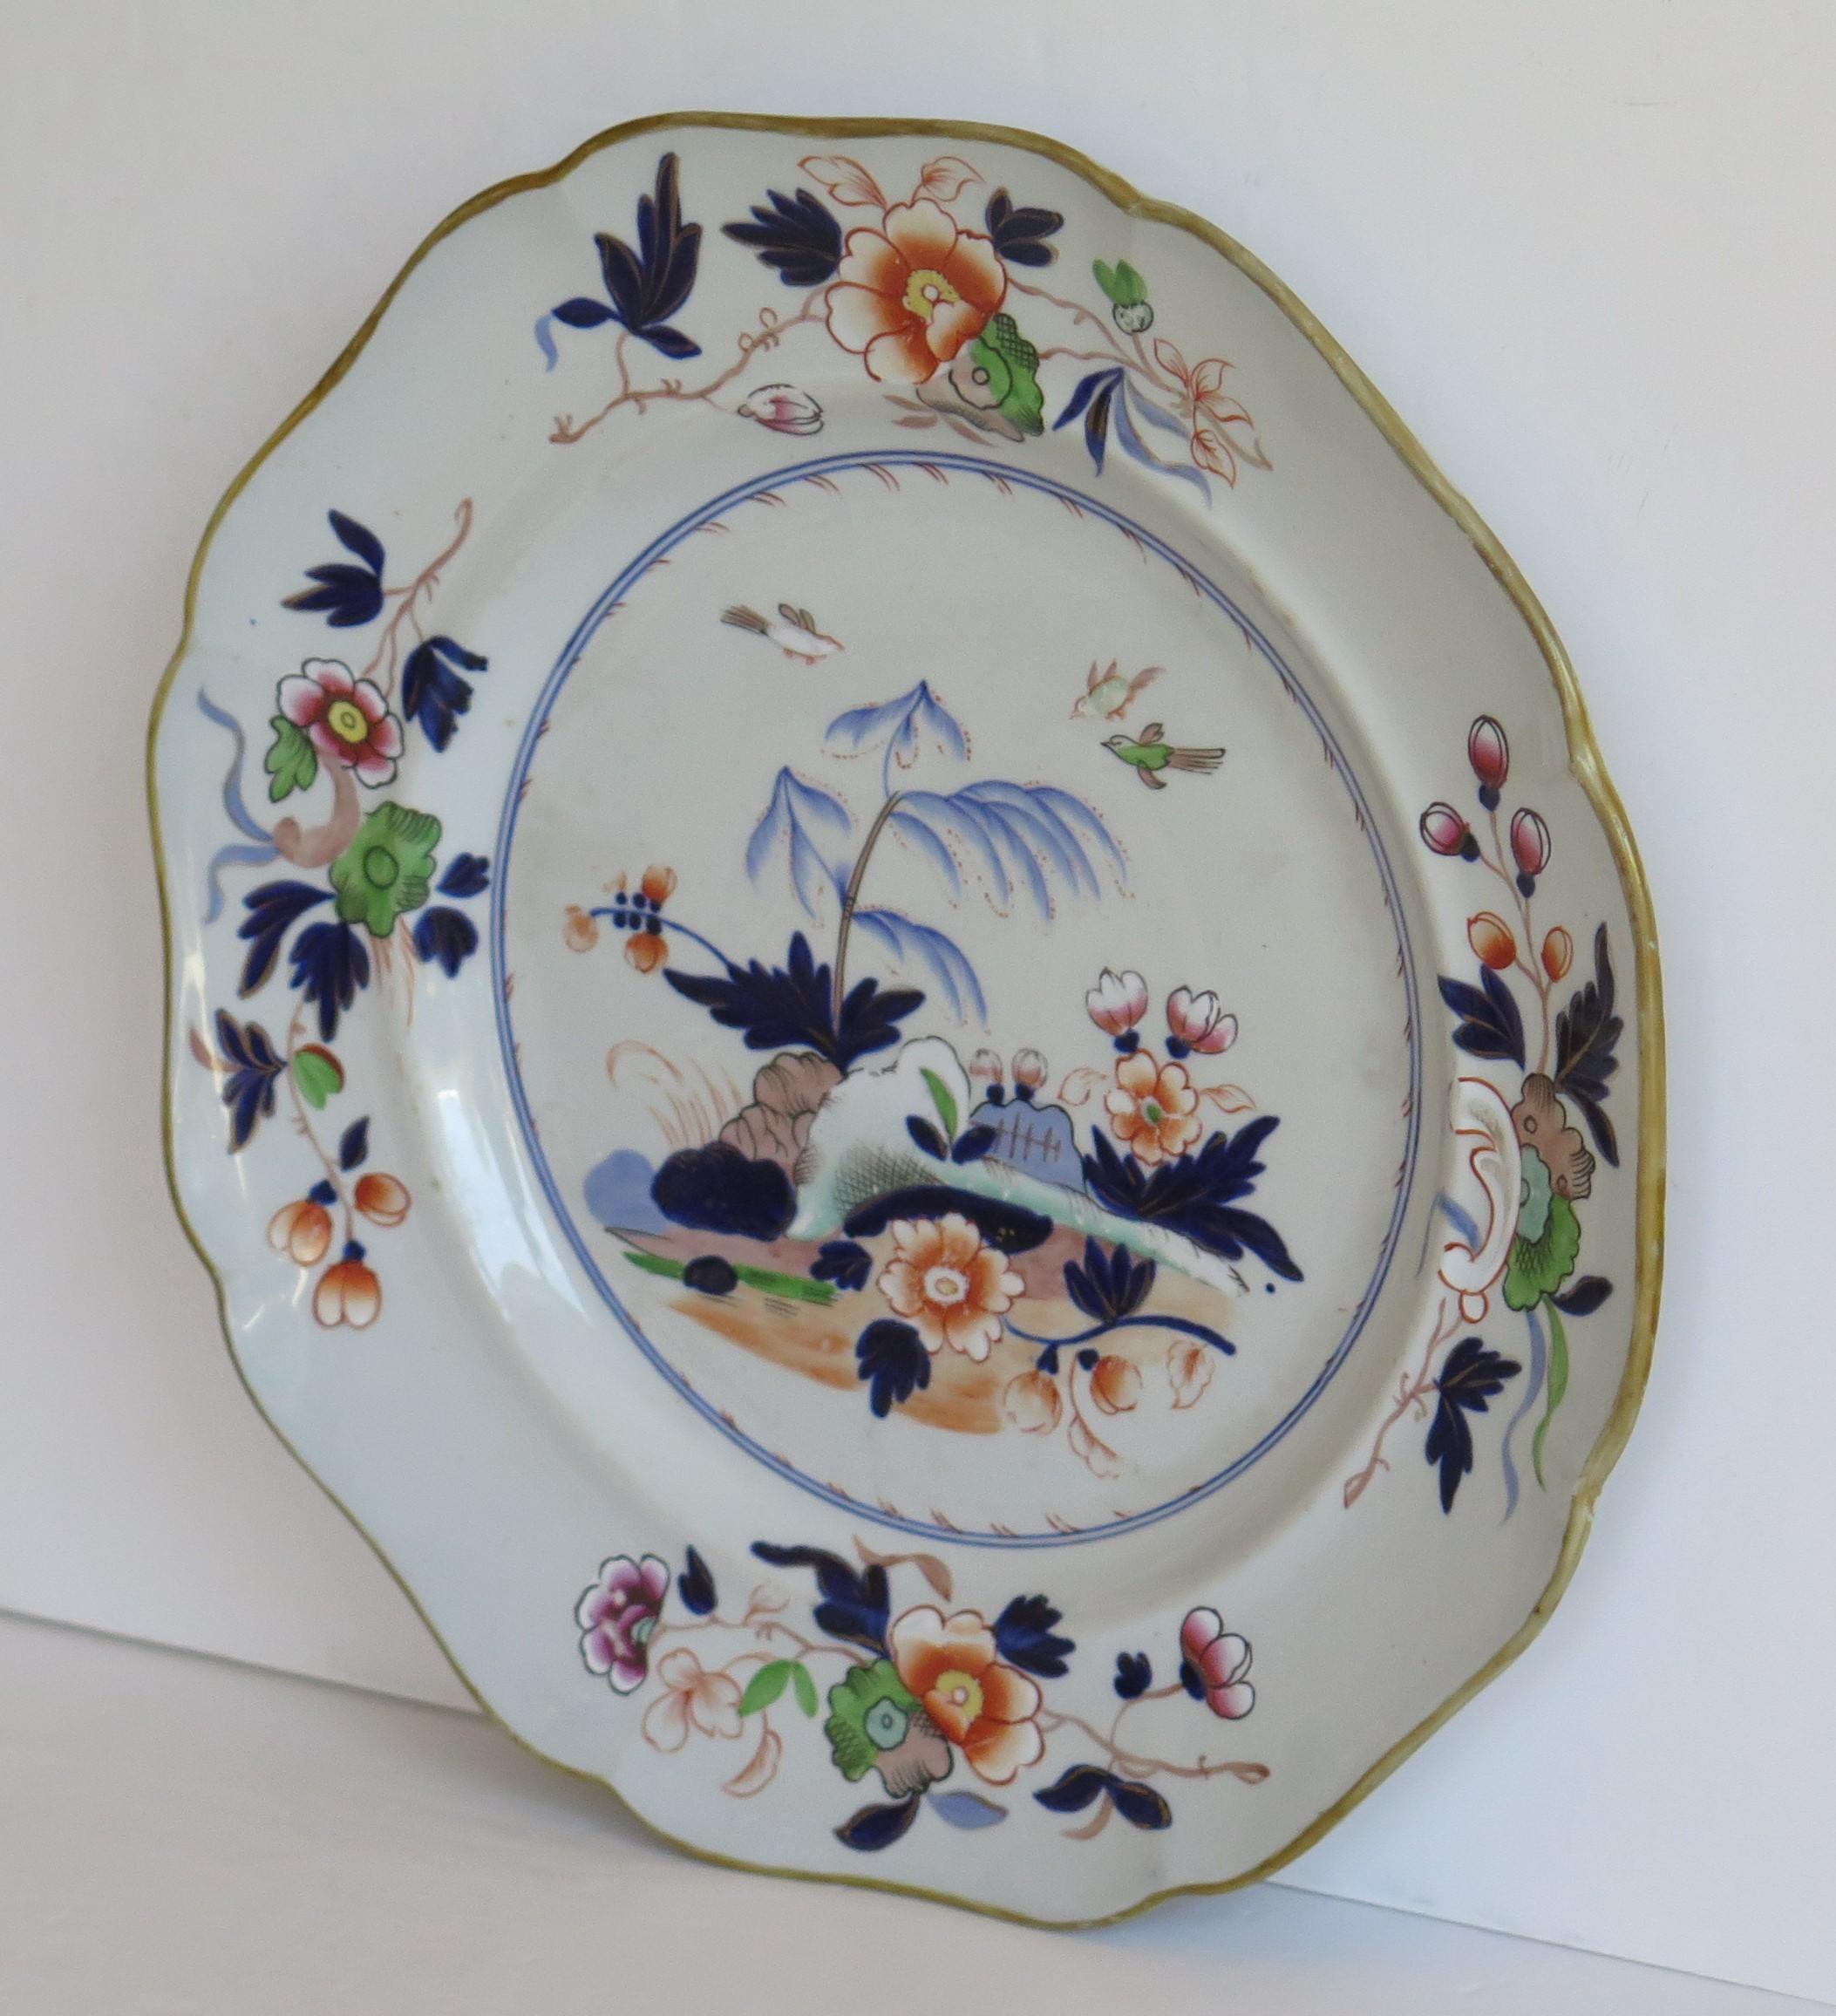 This is a very decorative, Imperial Stone China (ironstone), large Dinner Plate by John Ridgway, dating to the William IVth period of the 19th century.

The plate is potted in the Napier shape with a fluted wavy outer rim.

The plate has been